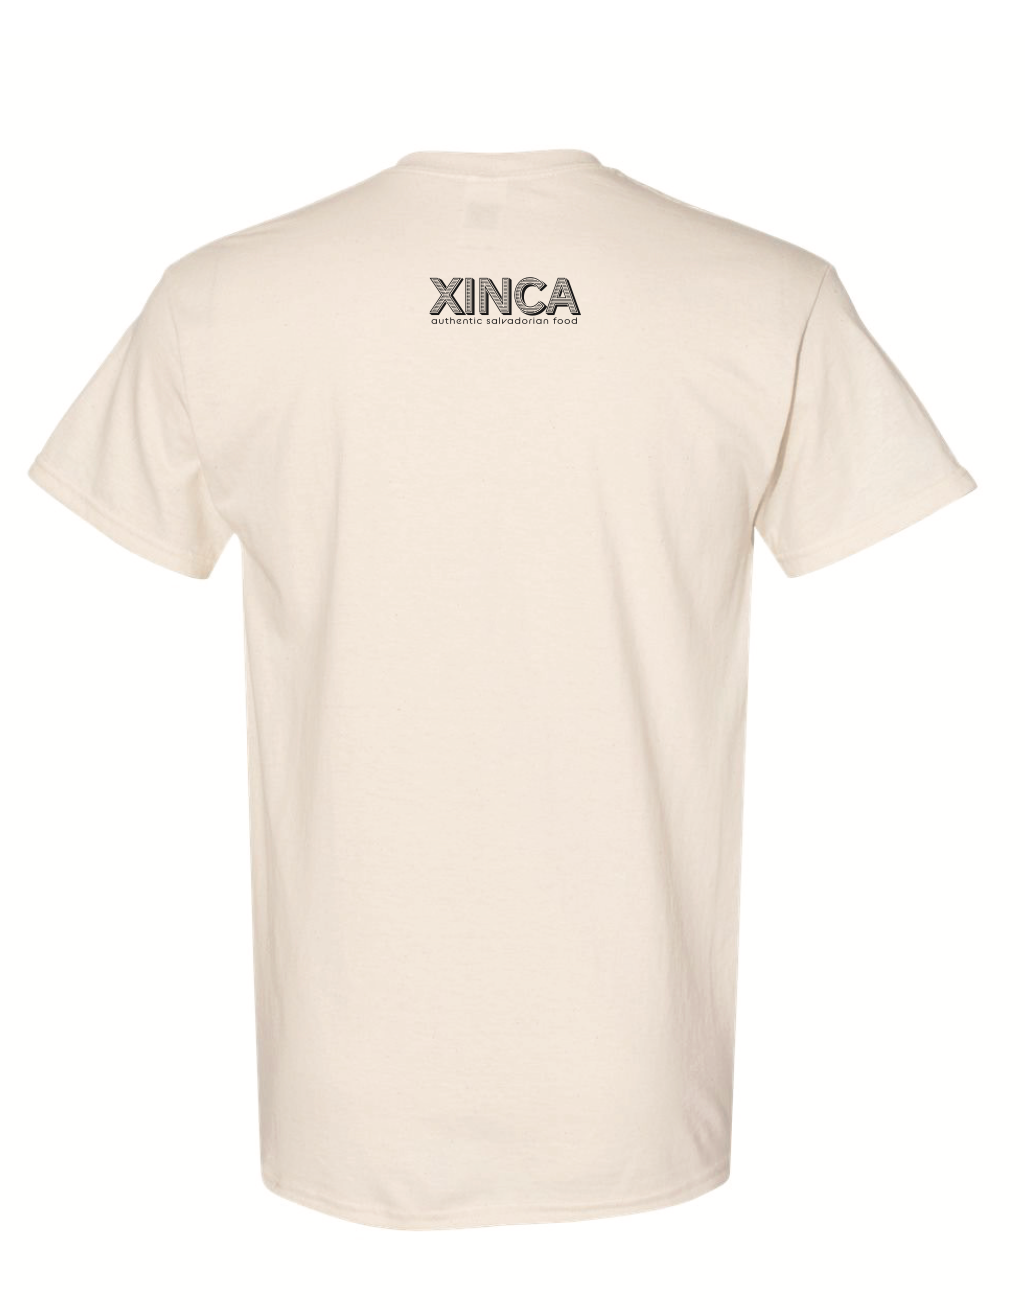 Back of the white shirt with Xinca Authentic Salvadorian Food logo